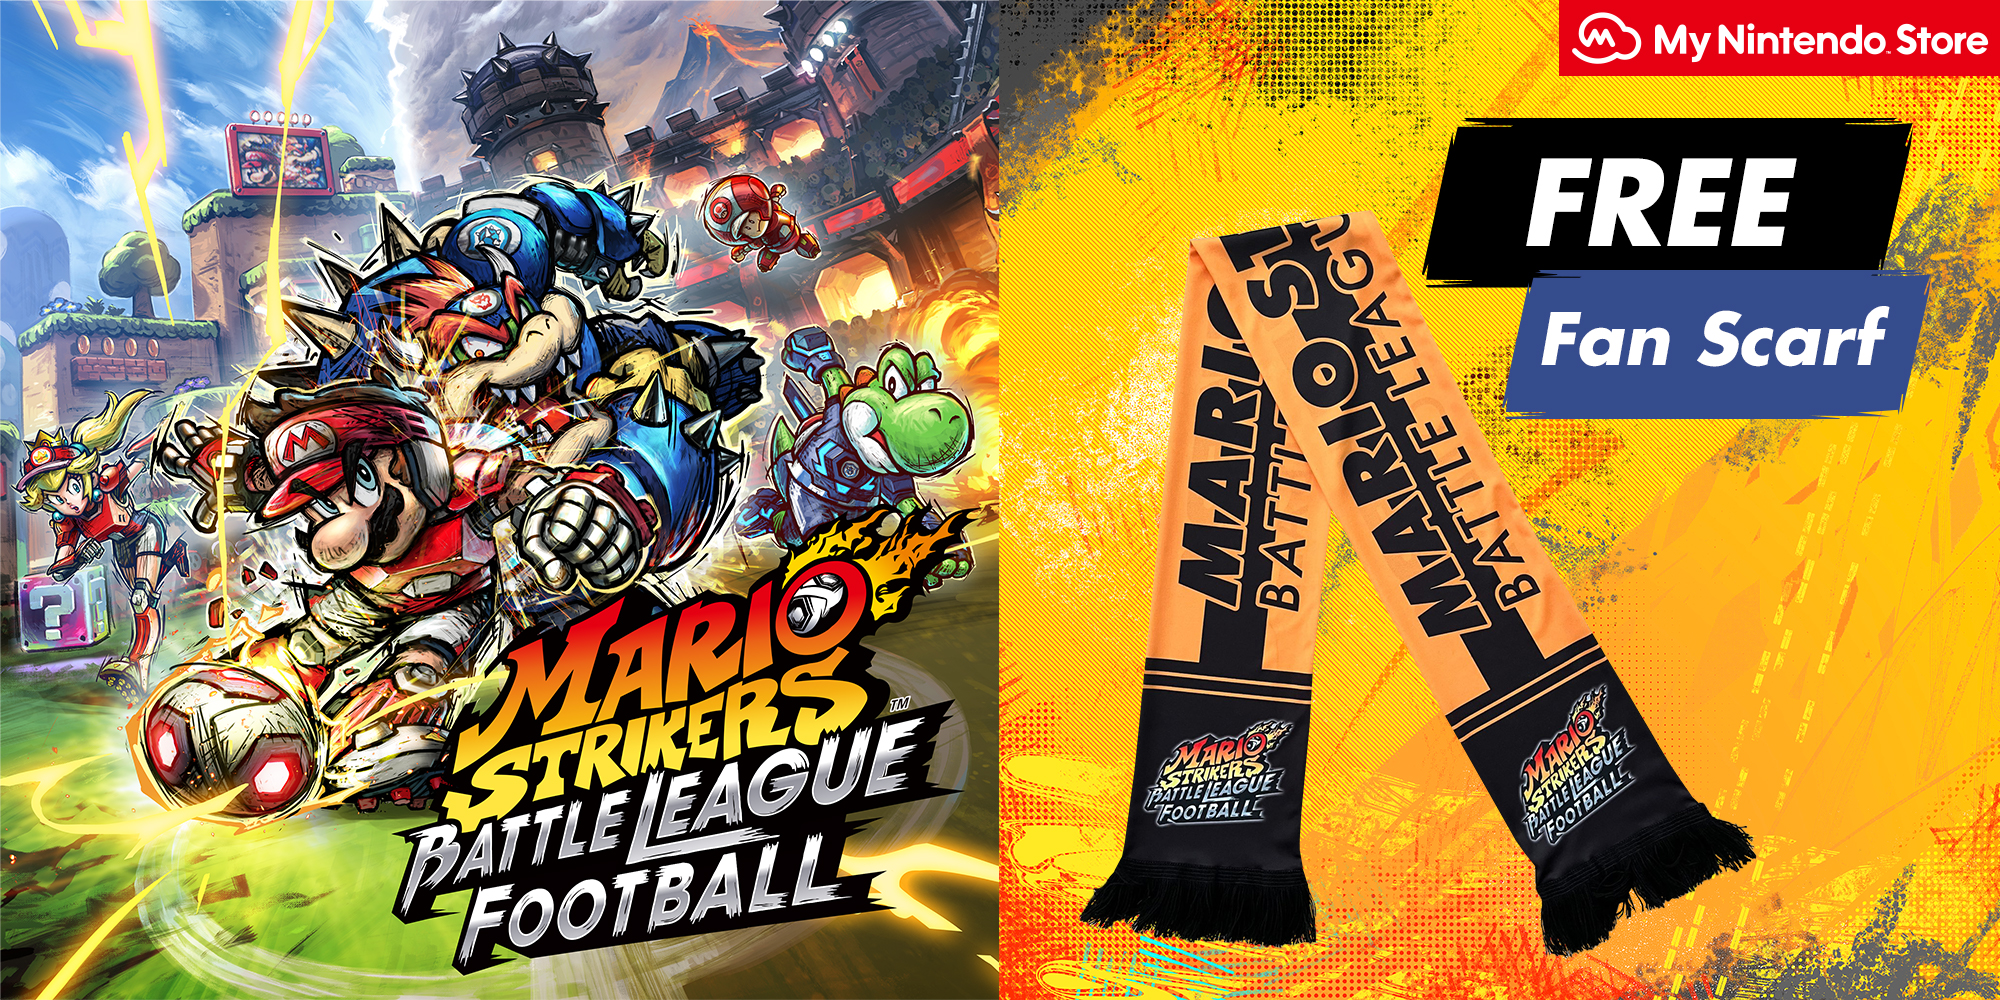 Pre-order Mario Strikers: Battle League Football on My Nintendo Store and  receive a free Fan Scarf!, News